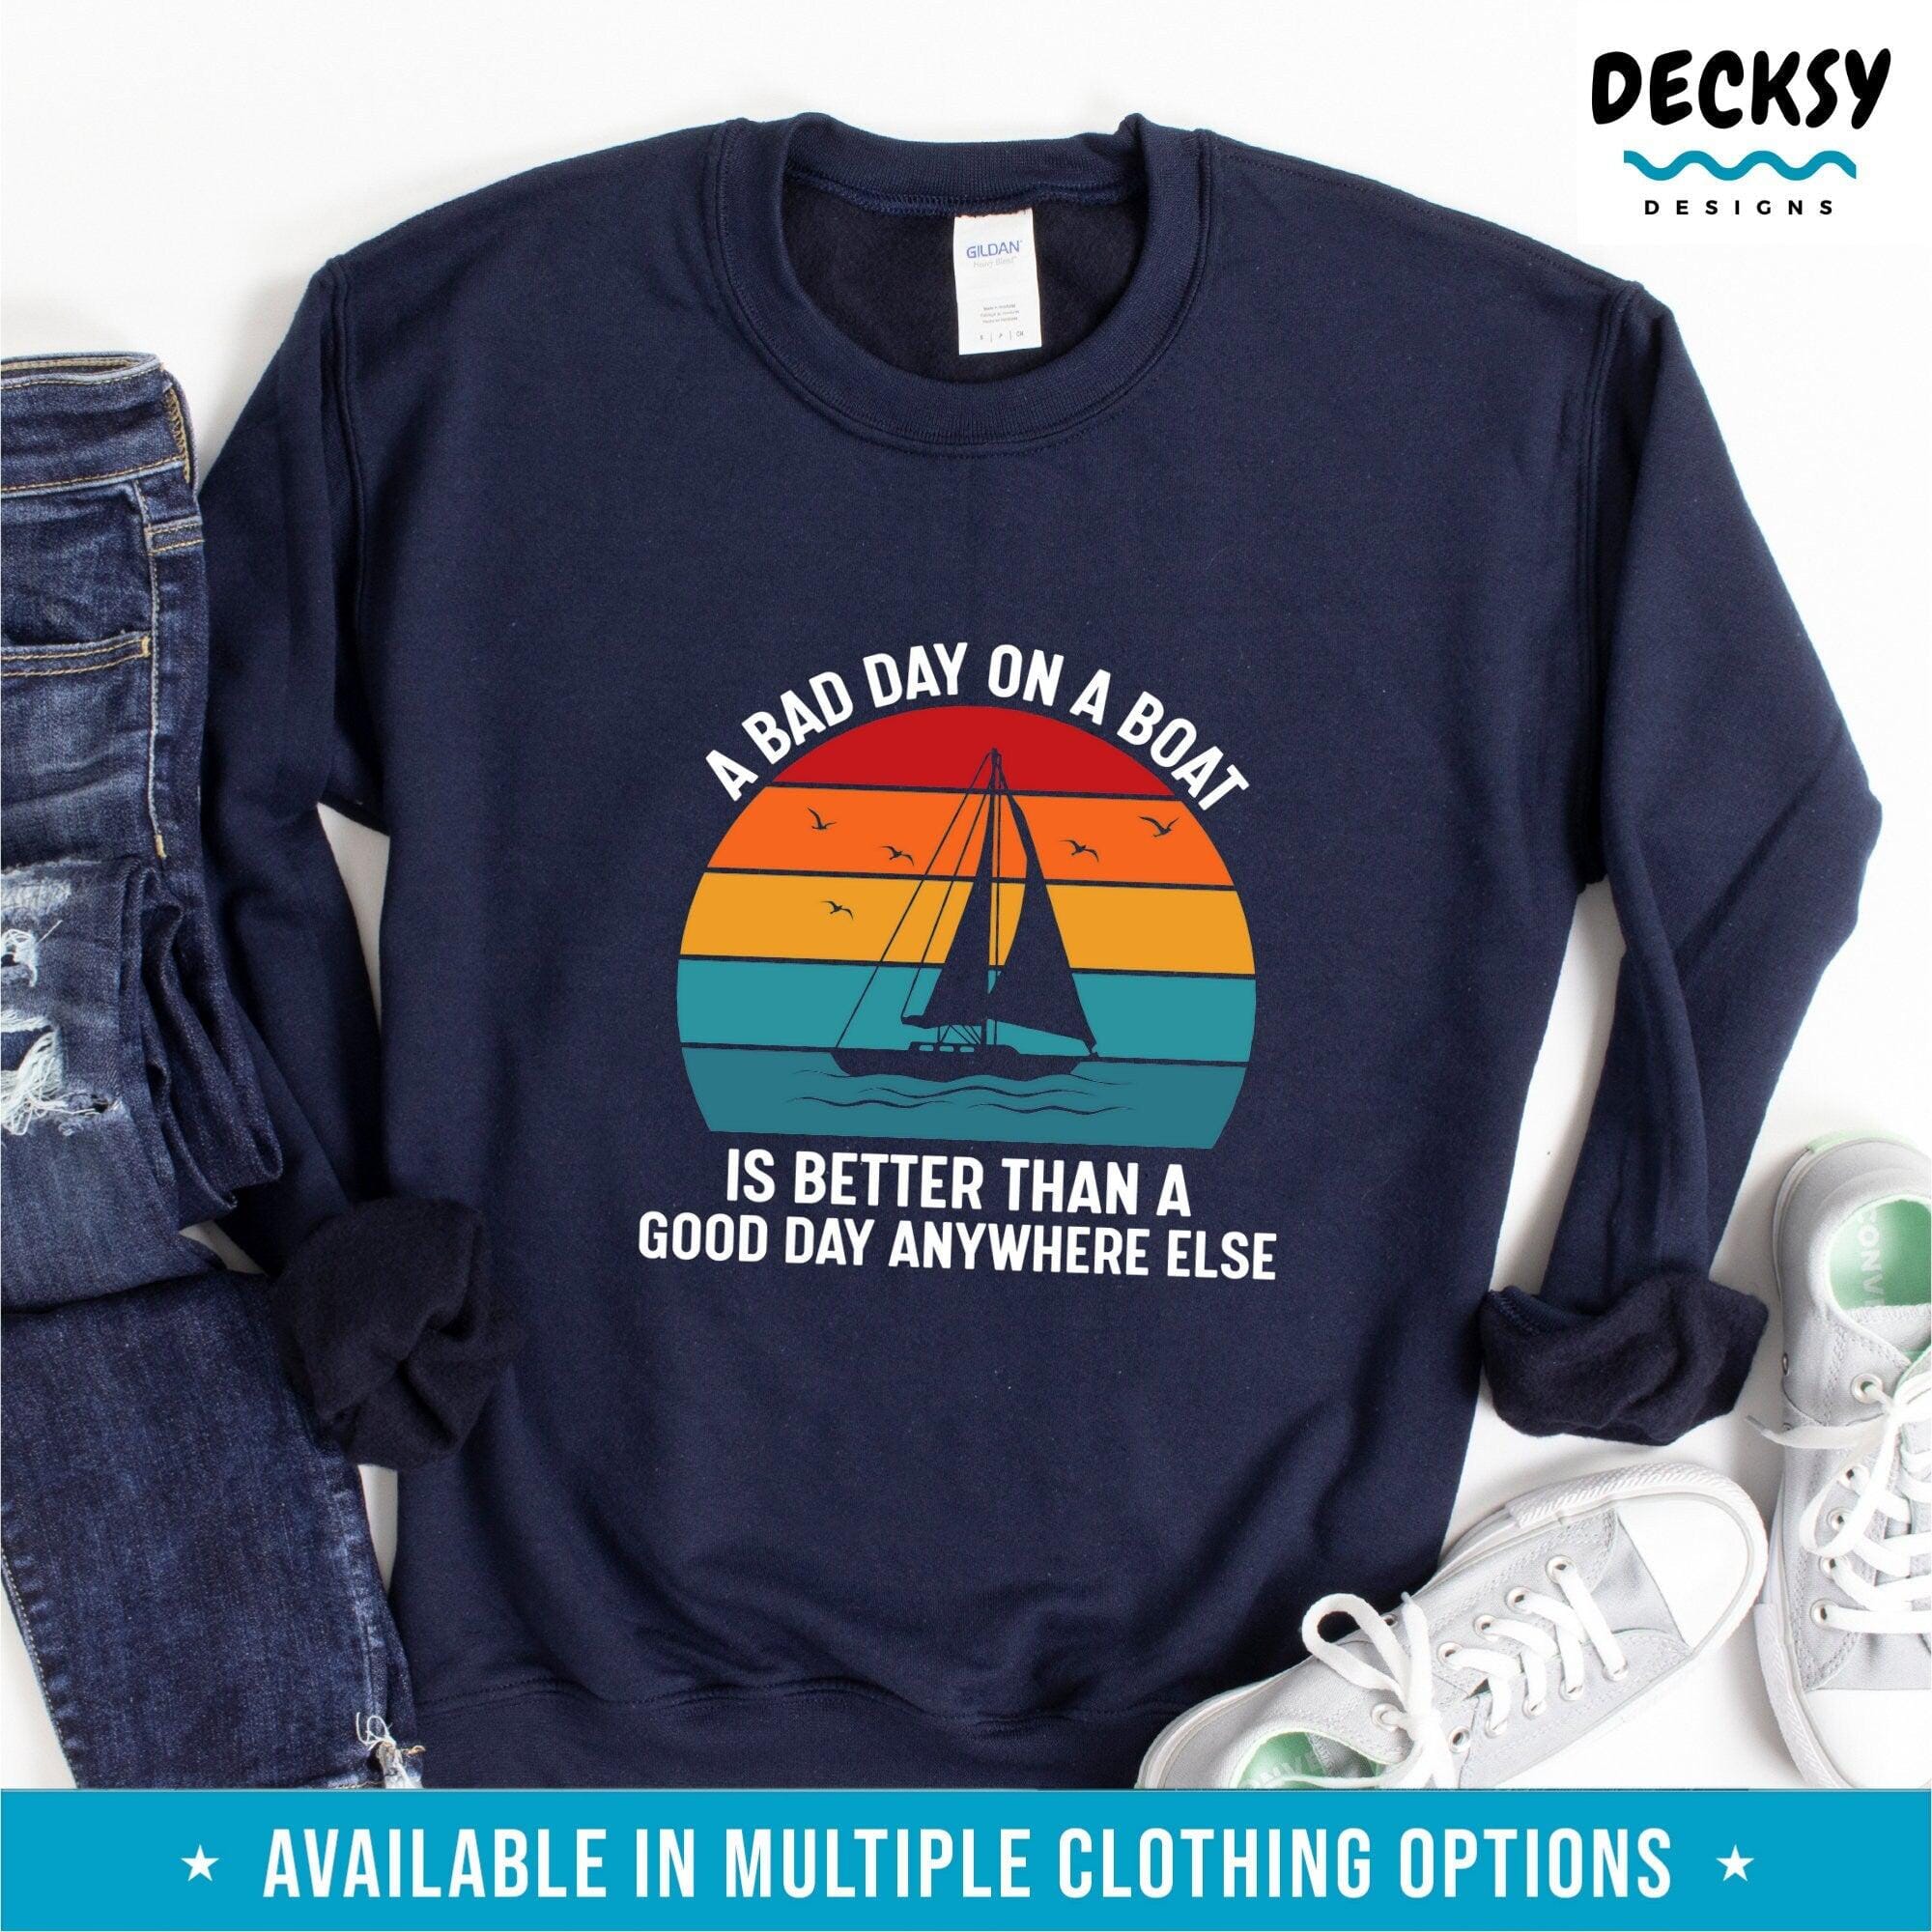 Boat Lover Shirt, Funny Boating Gift-Clothing:Gender-Neutral Adult Clothing:Tops & Tees:T-shirts:Graphic Tees-DecksyDesigns